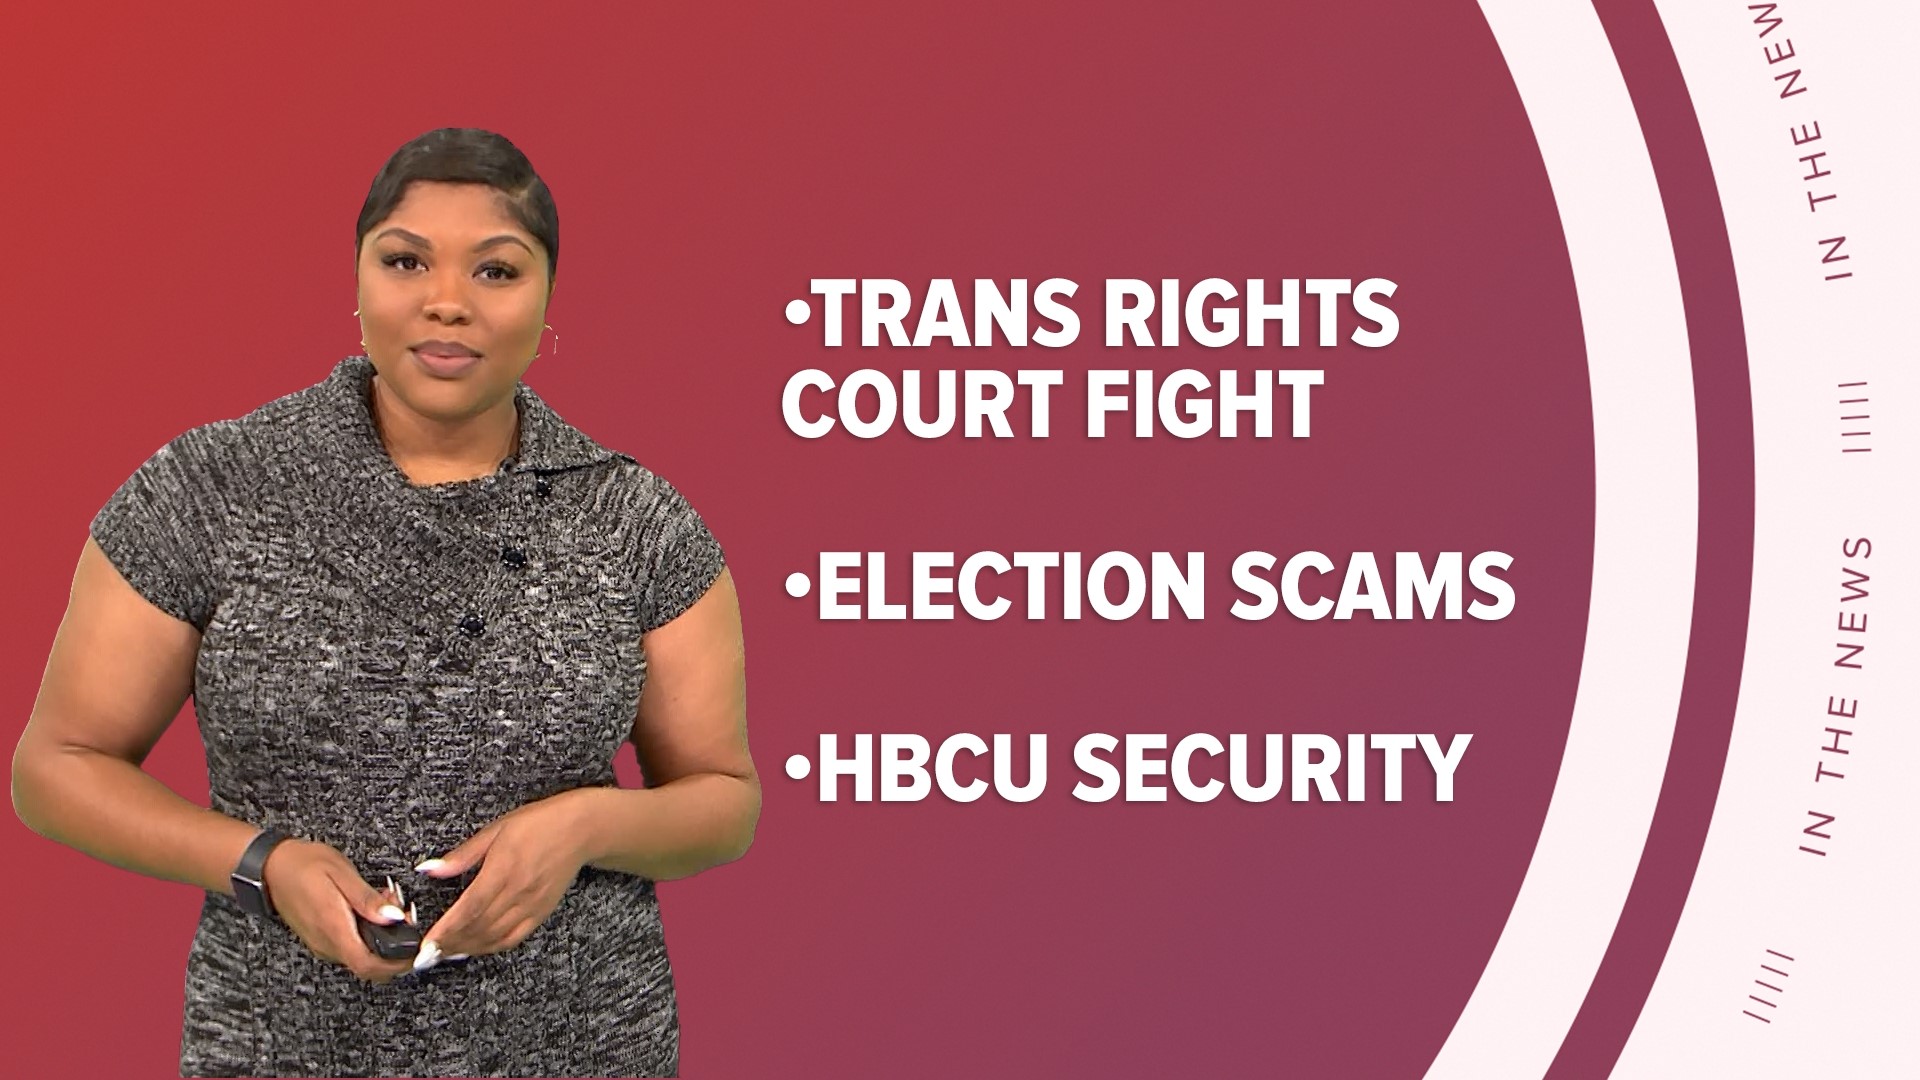 A look at what is happening in the news from HBCU students calling for more security to a landmark trial underway for transgender youth care in Arkansas.